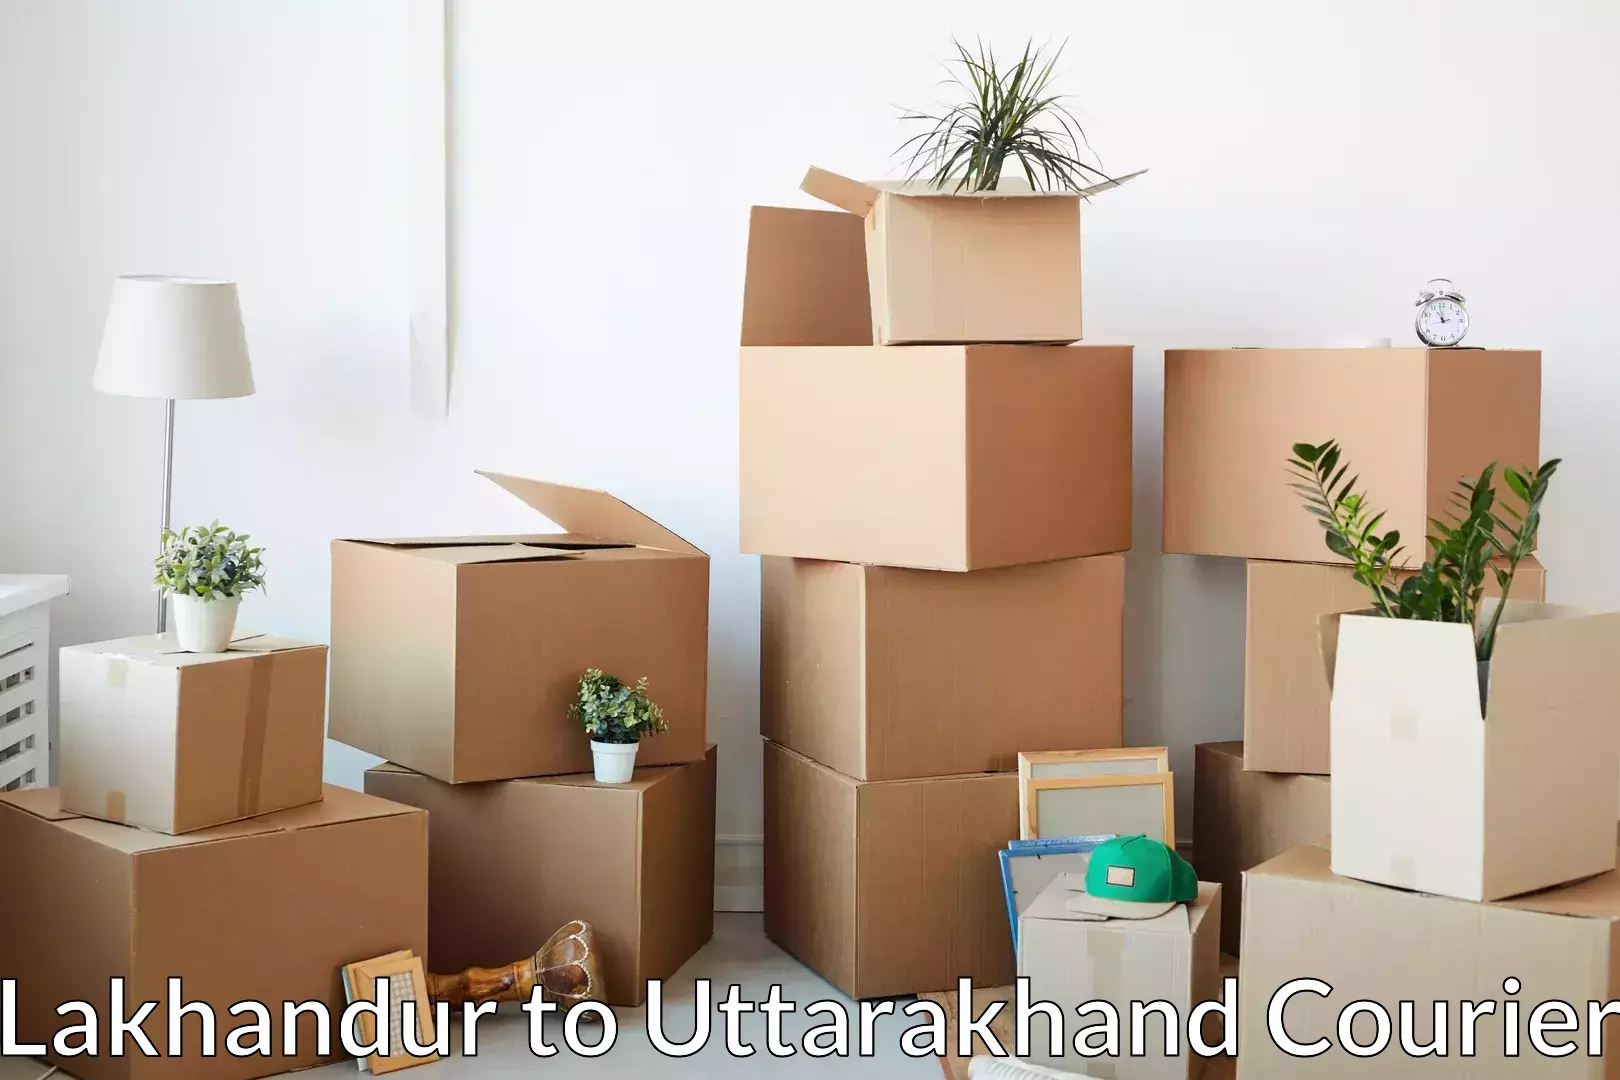 Furniture delivery service Lakhandur to Paithani